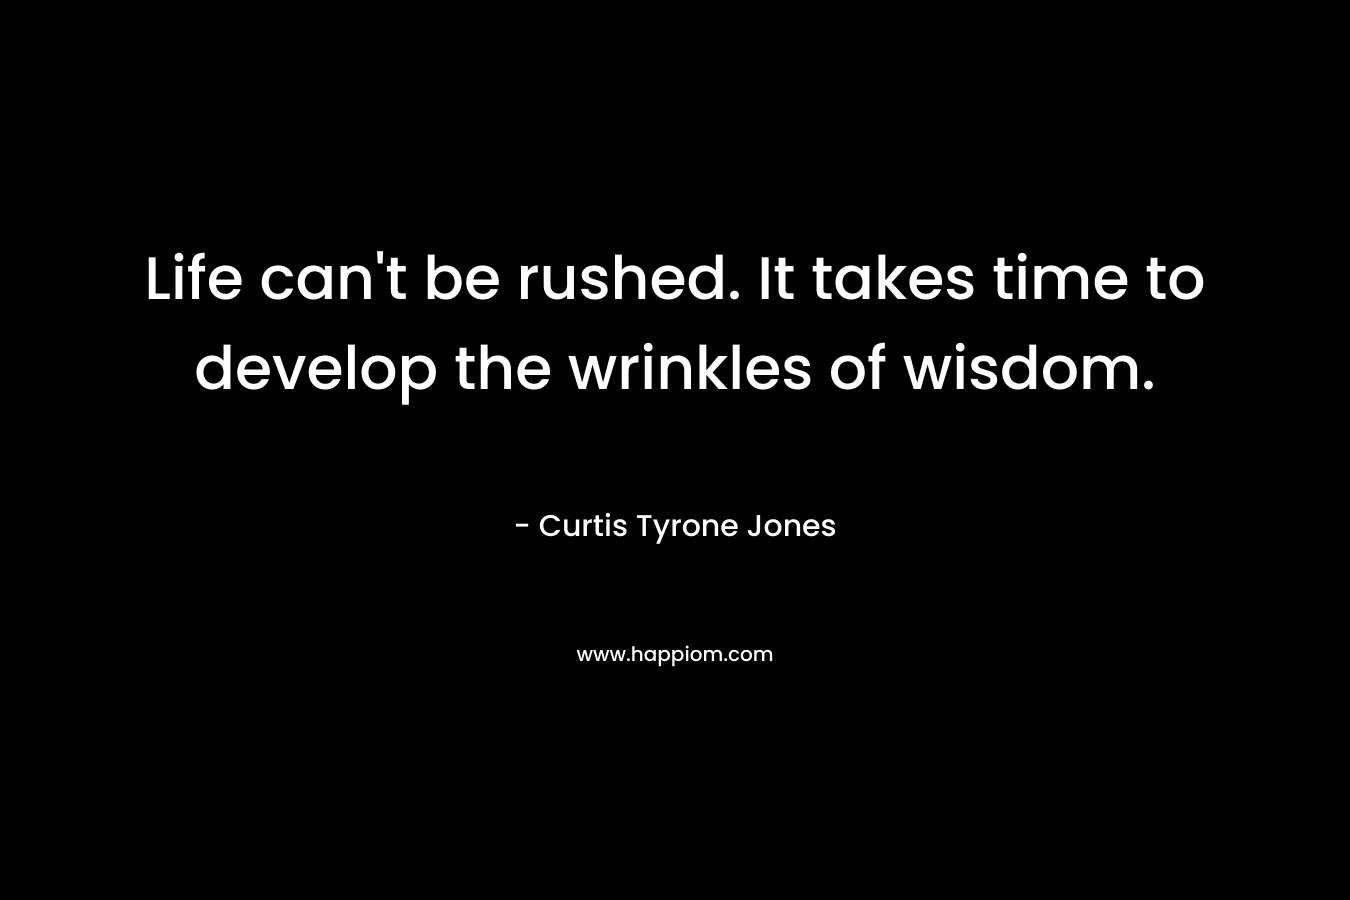 Life can't be rushed. It takes time to develop the wrinkles of wisdom.